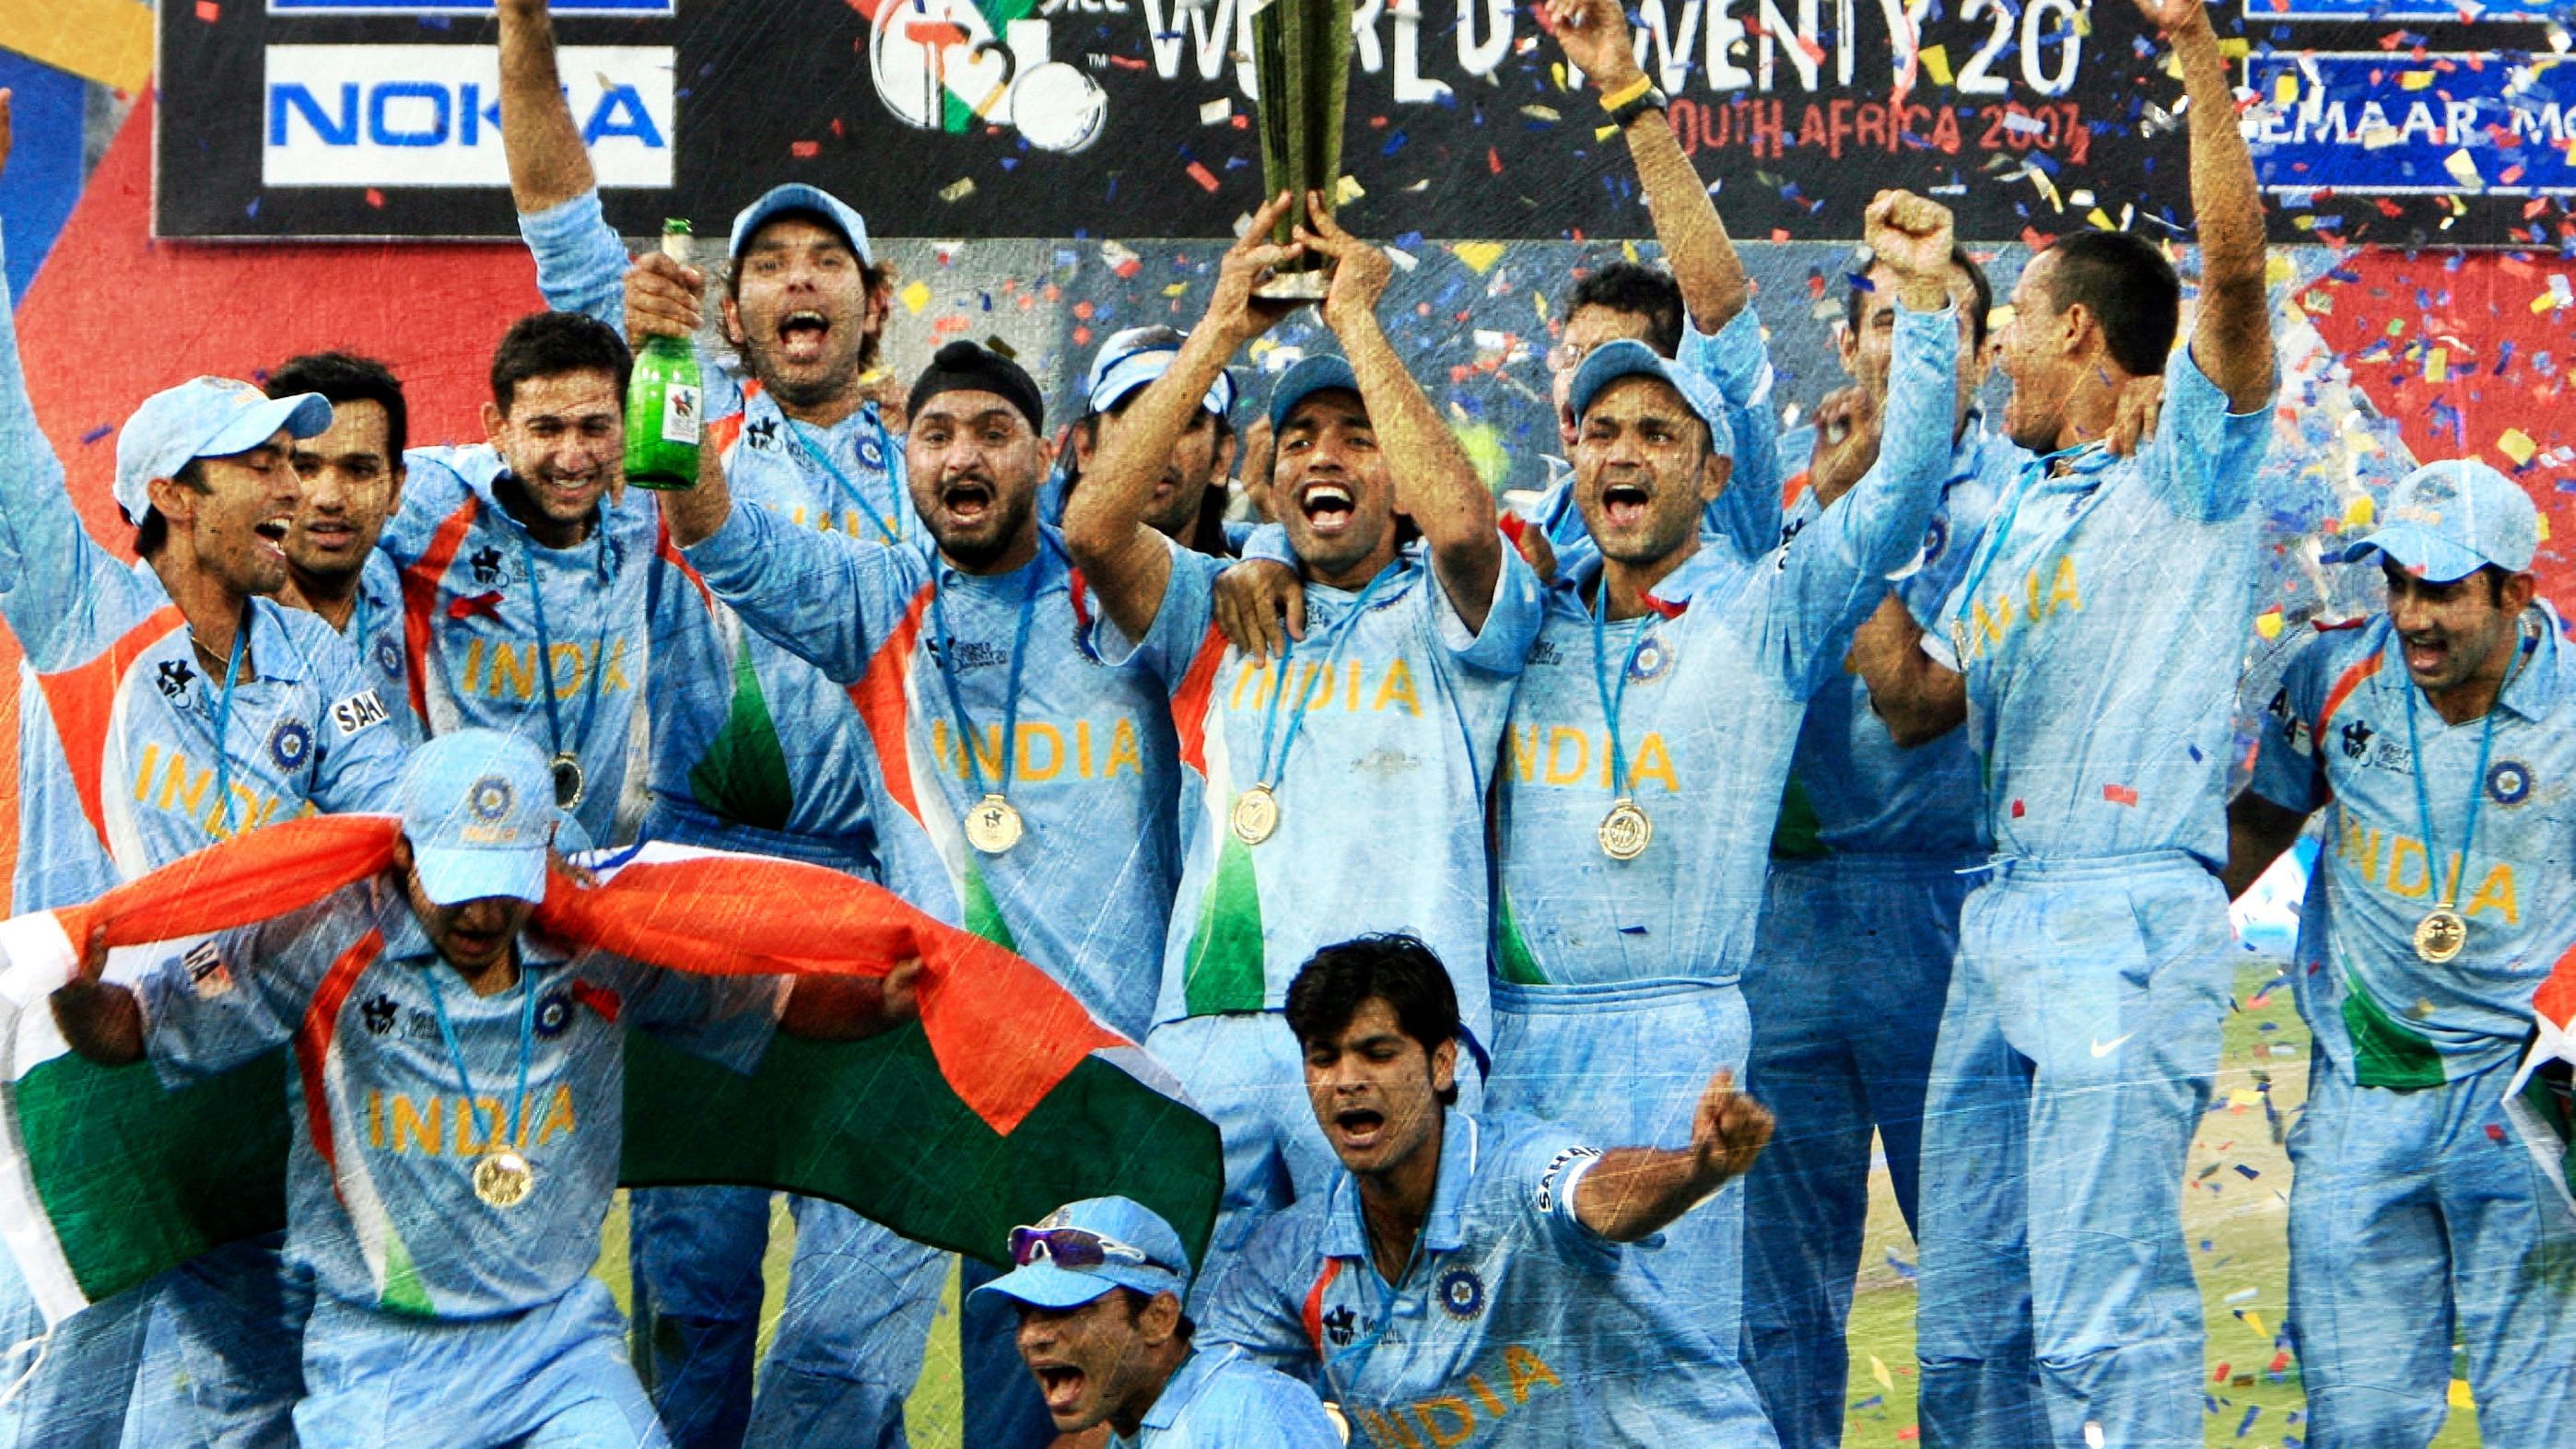 Indian players celebrate after winning the inaugural T20 World Cup in South Africa (Photo: Reuters)